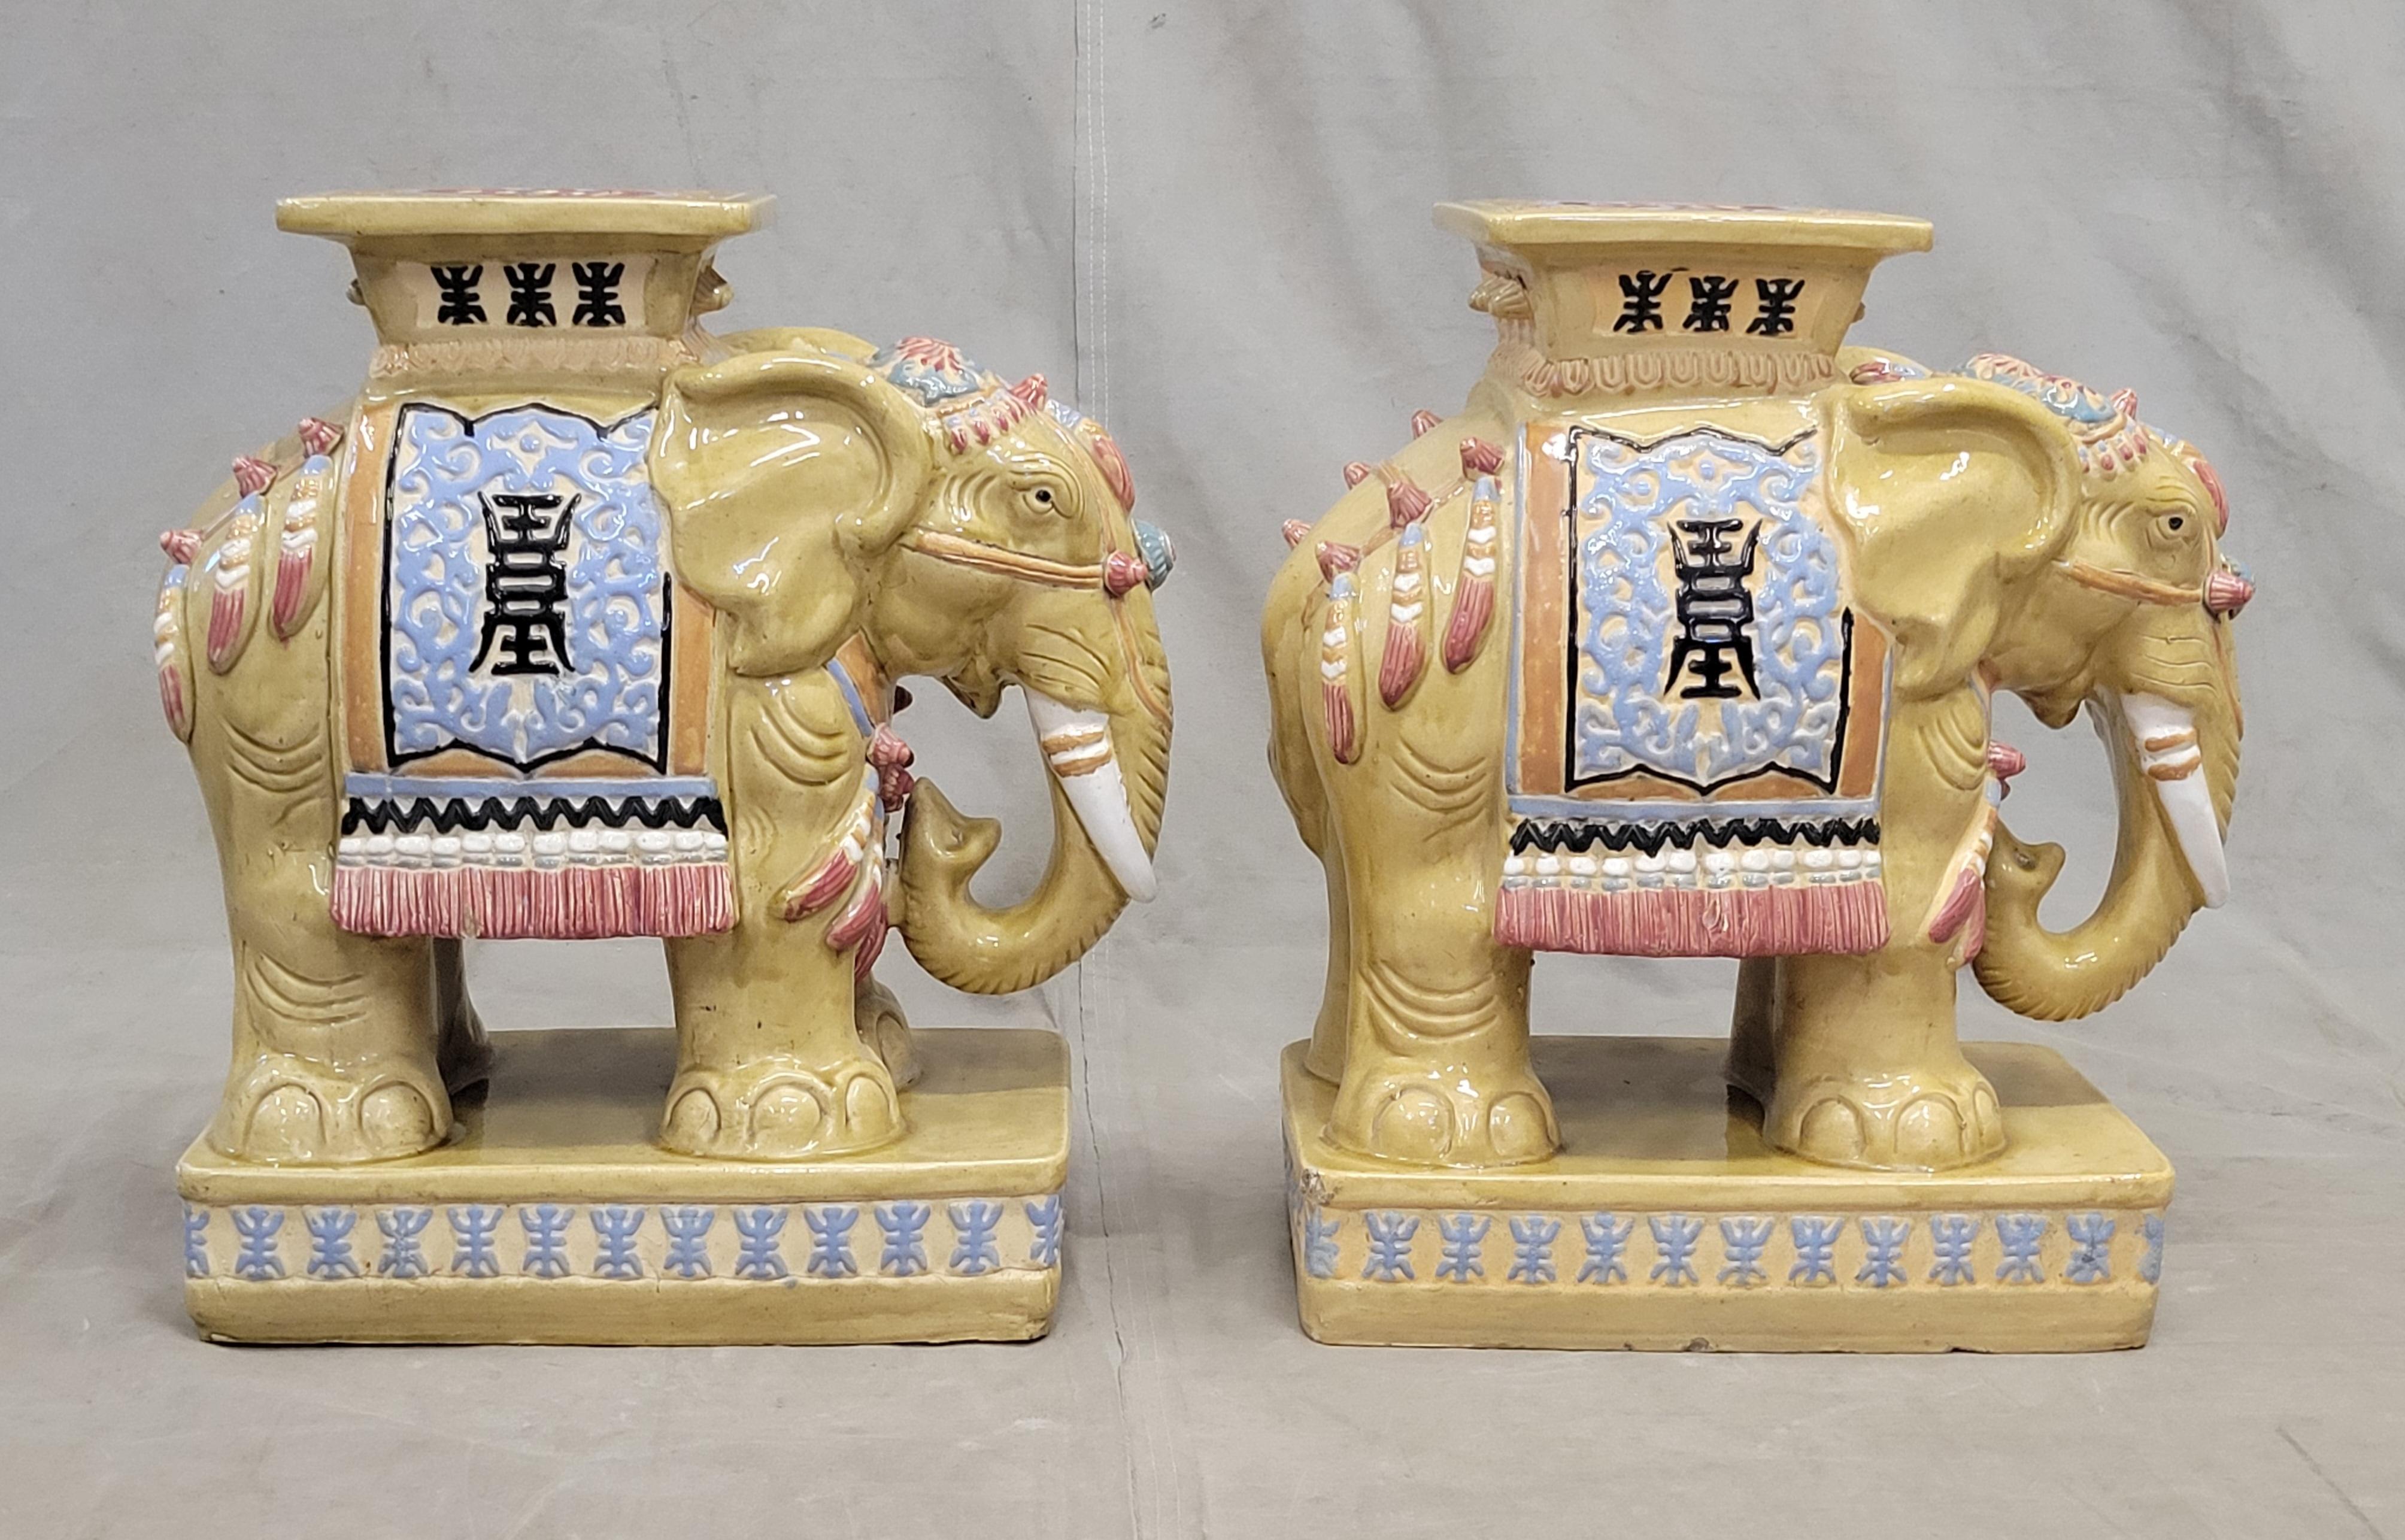 Such a charming pair of vintage Chinese elephant garden stools. Shades of tan/yellow, white, rose colored pink, pale blue, teal blue, navy blue and black. A fun accent either in a garden or in an interior setting.
In as found condition. See last